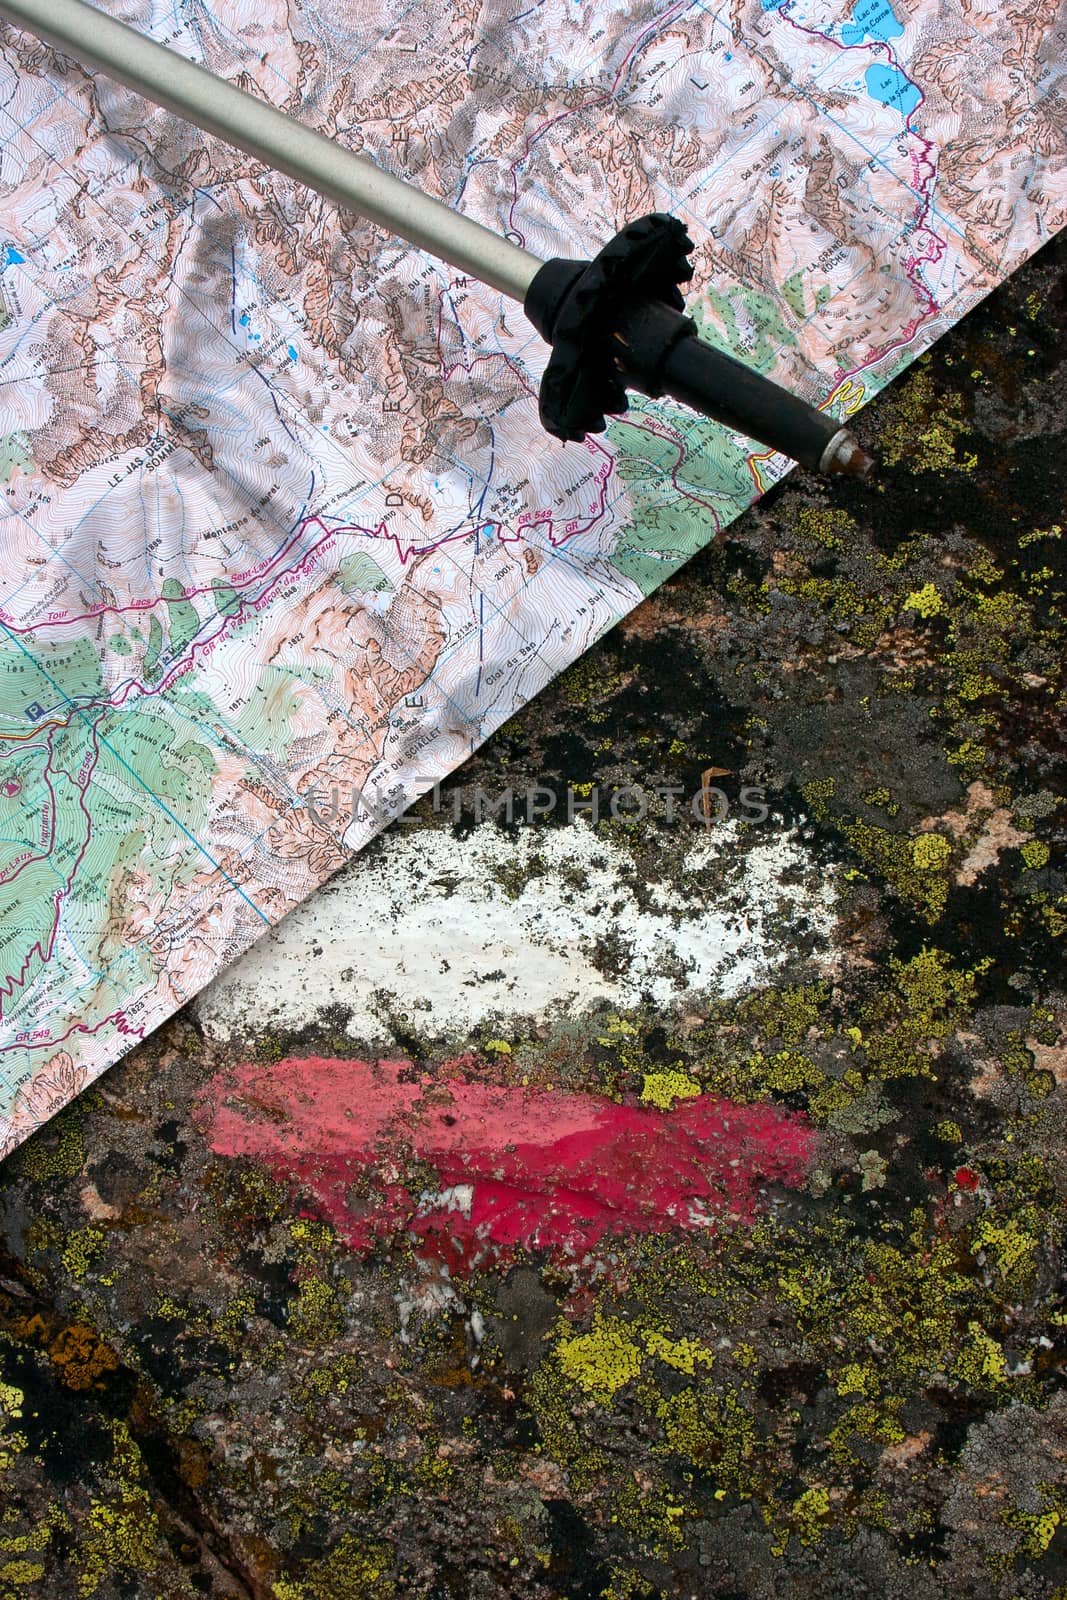 Trail Marker - Stick and Map by Kartouchken